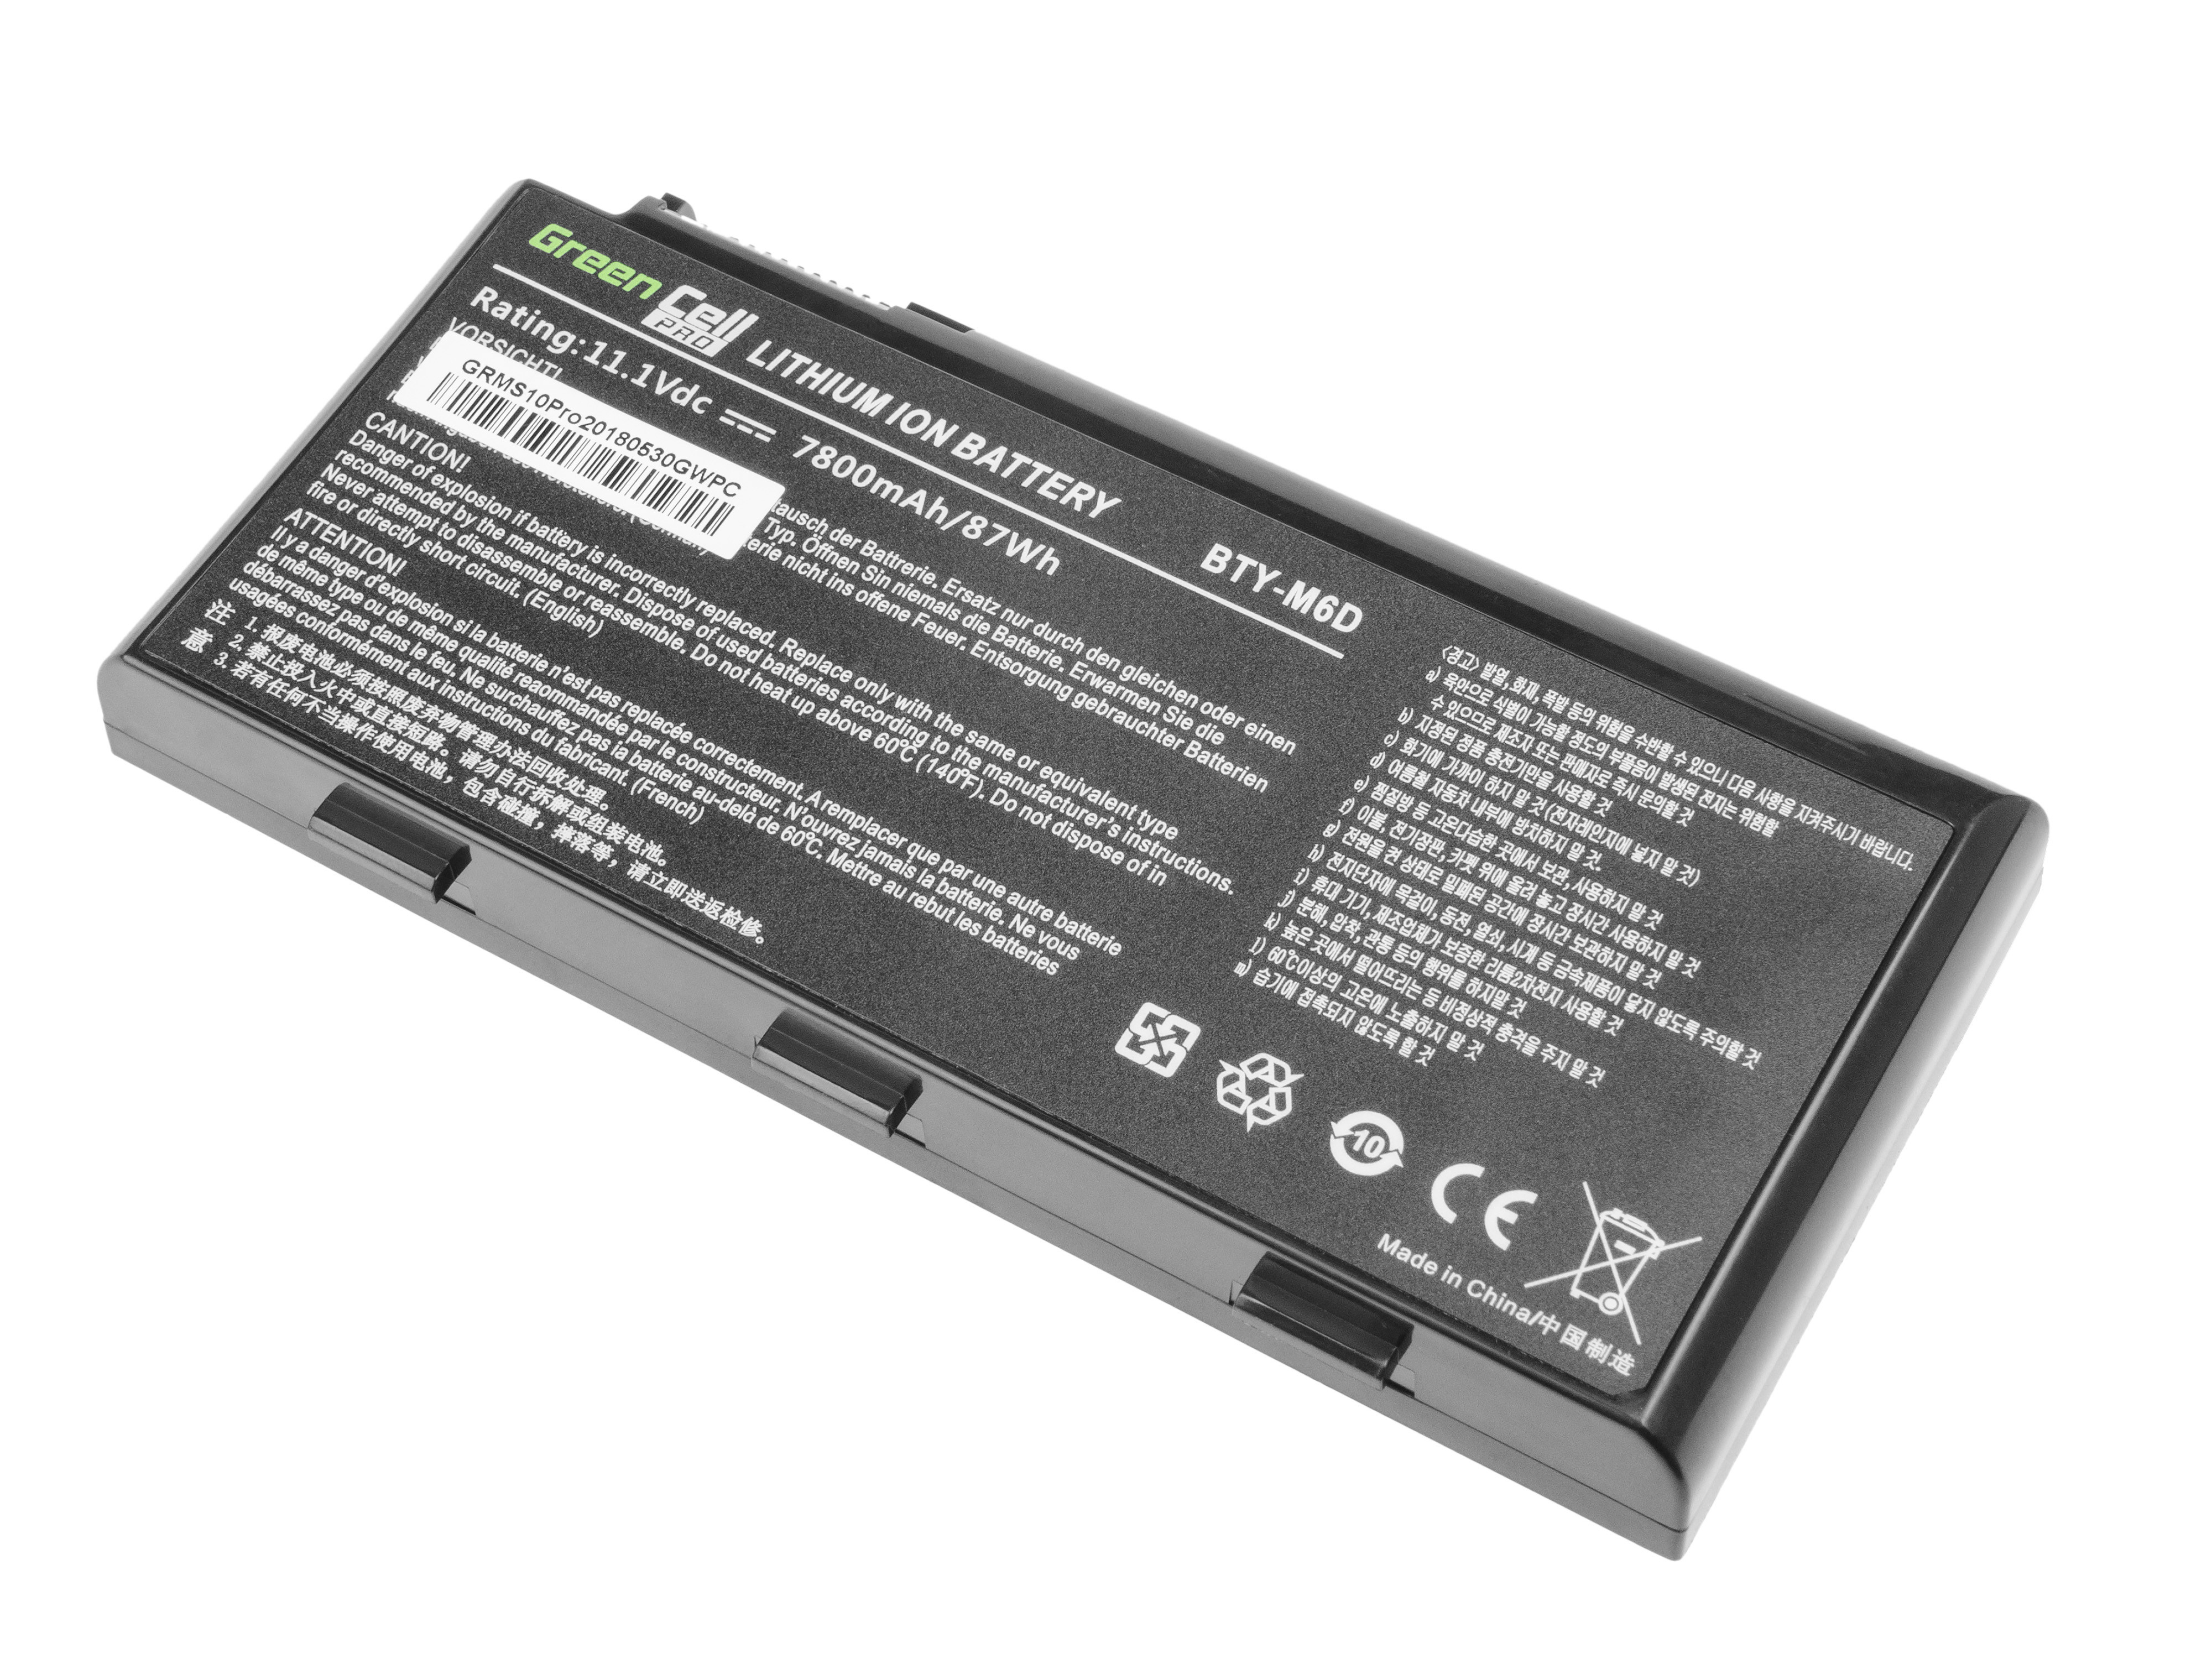 Green Cell MS10PRO Baterie MSI BTY-M6D do MSI GT60 GT70 GT660 GT680 GT683 GT780 GT783 GX660 GX680 GX780 7800mAh Li-ion